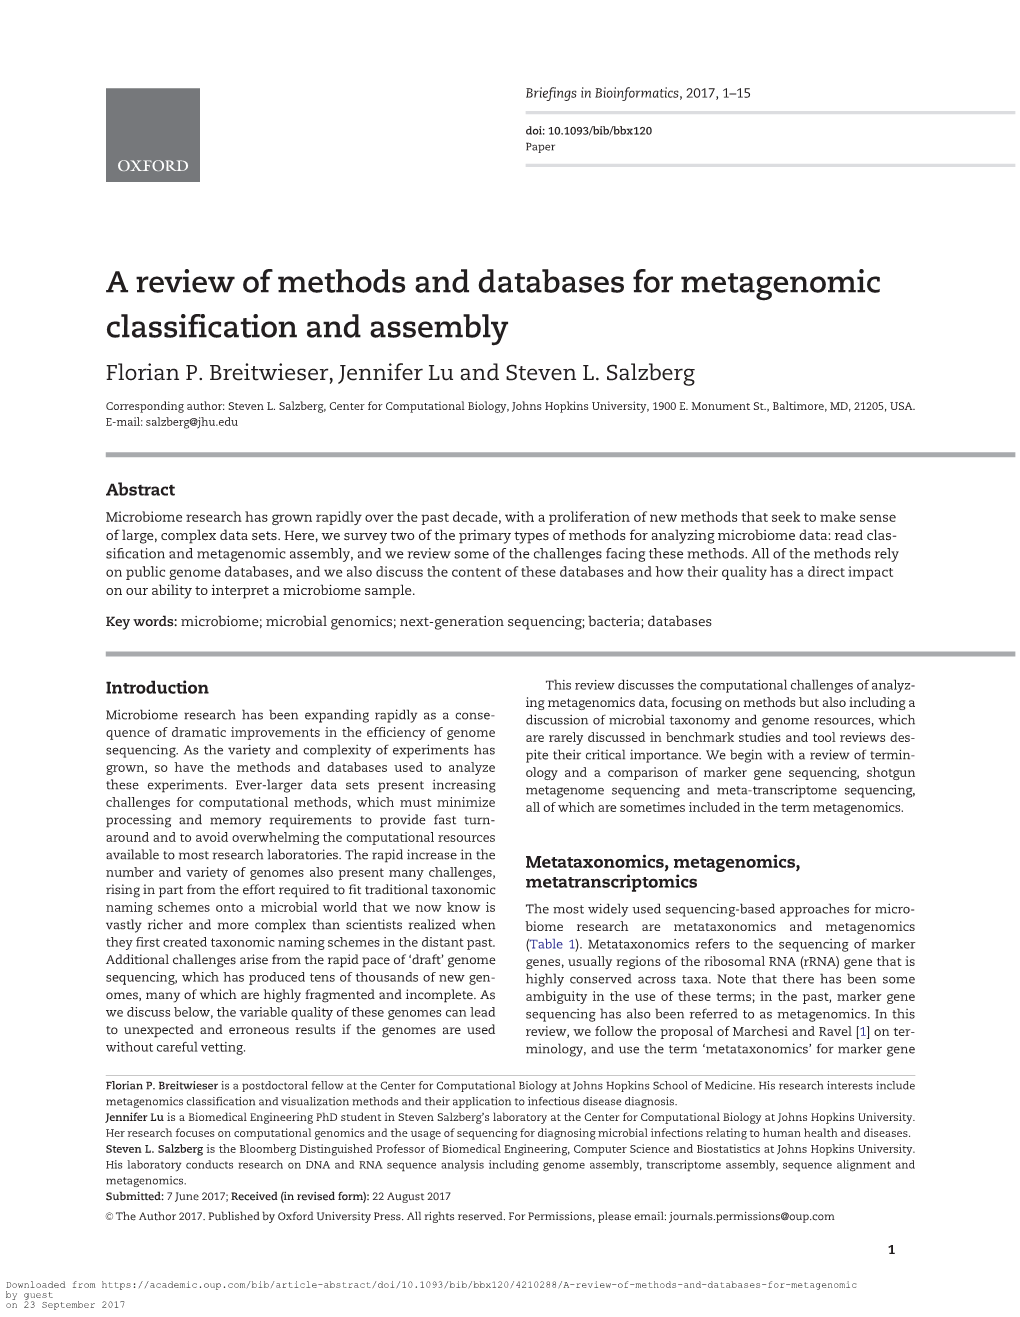 A Review of Methods and Databases for Metagenomic Classification and Assembly Florian P